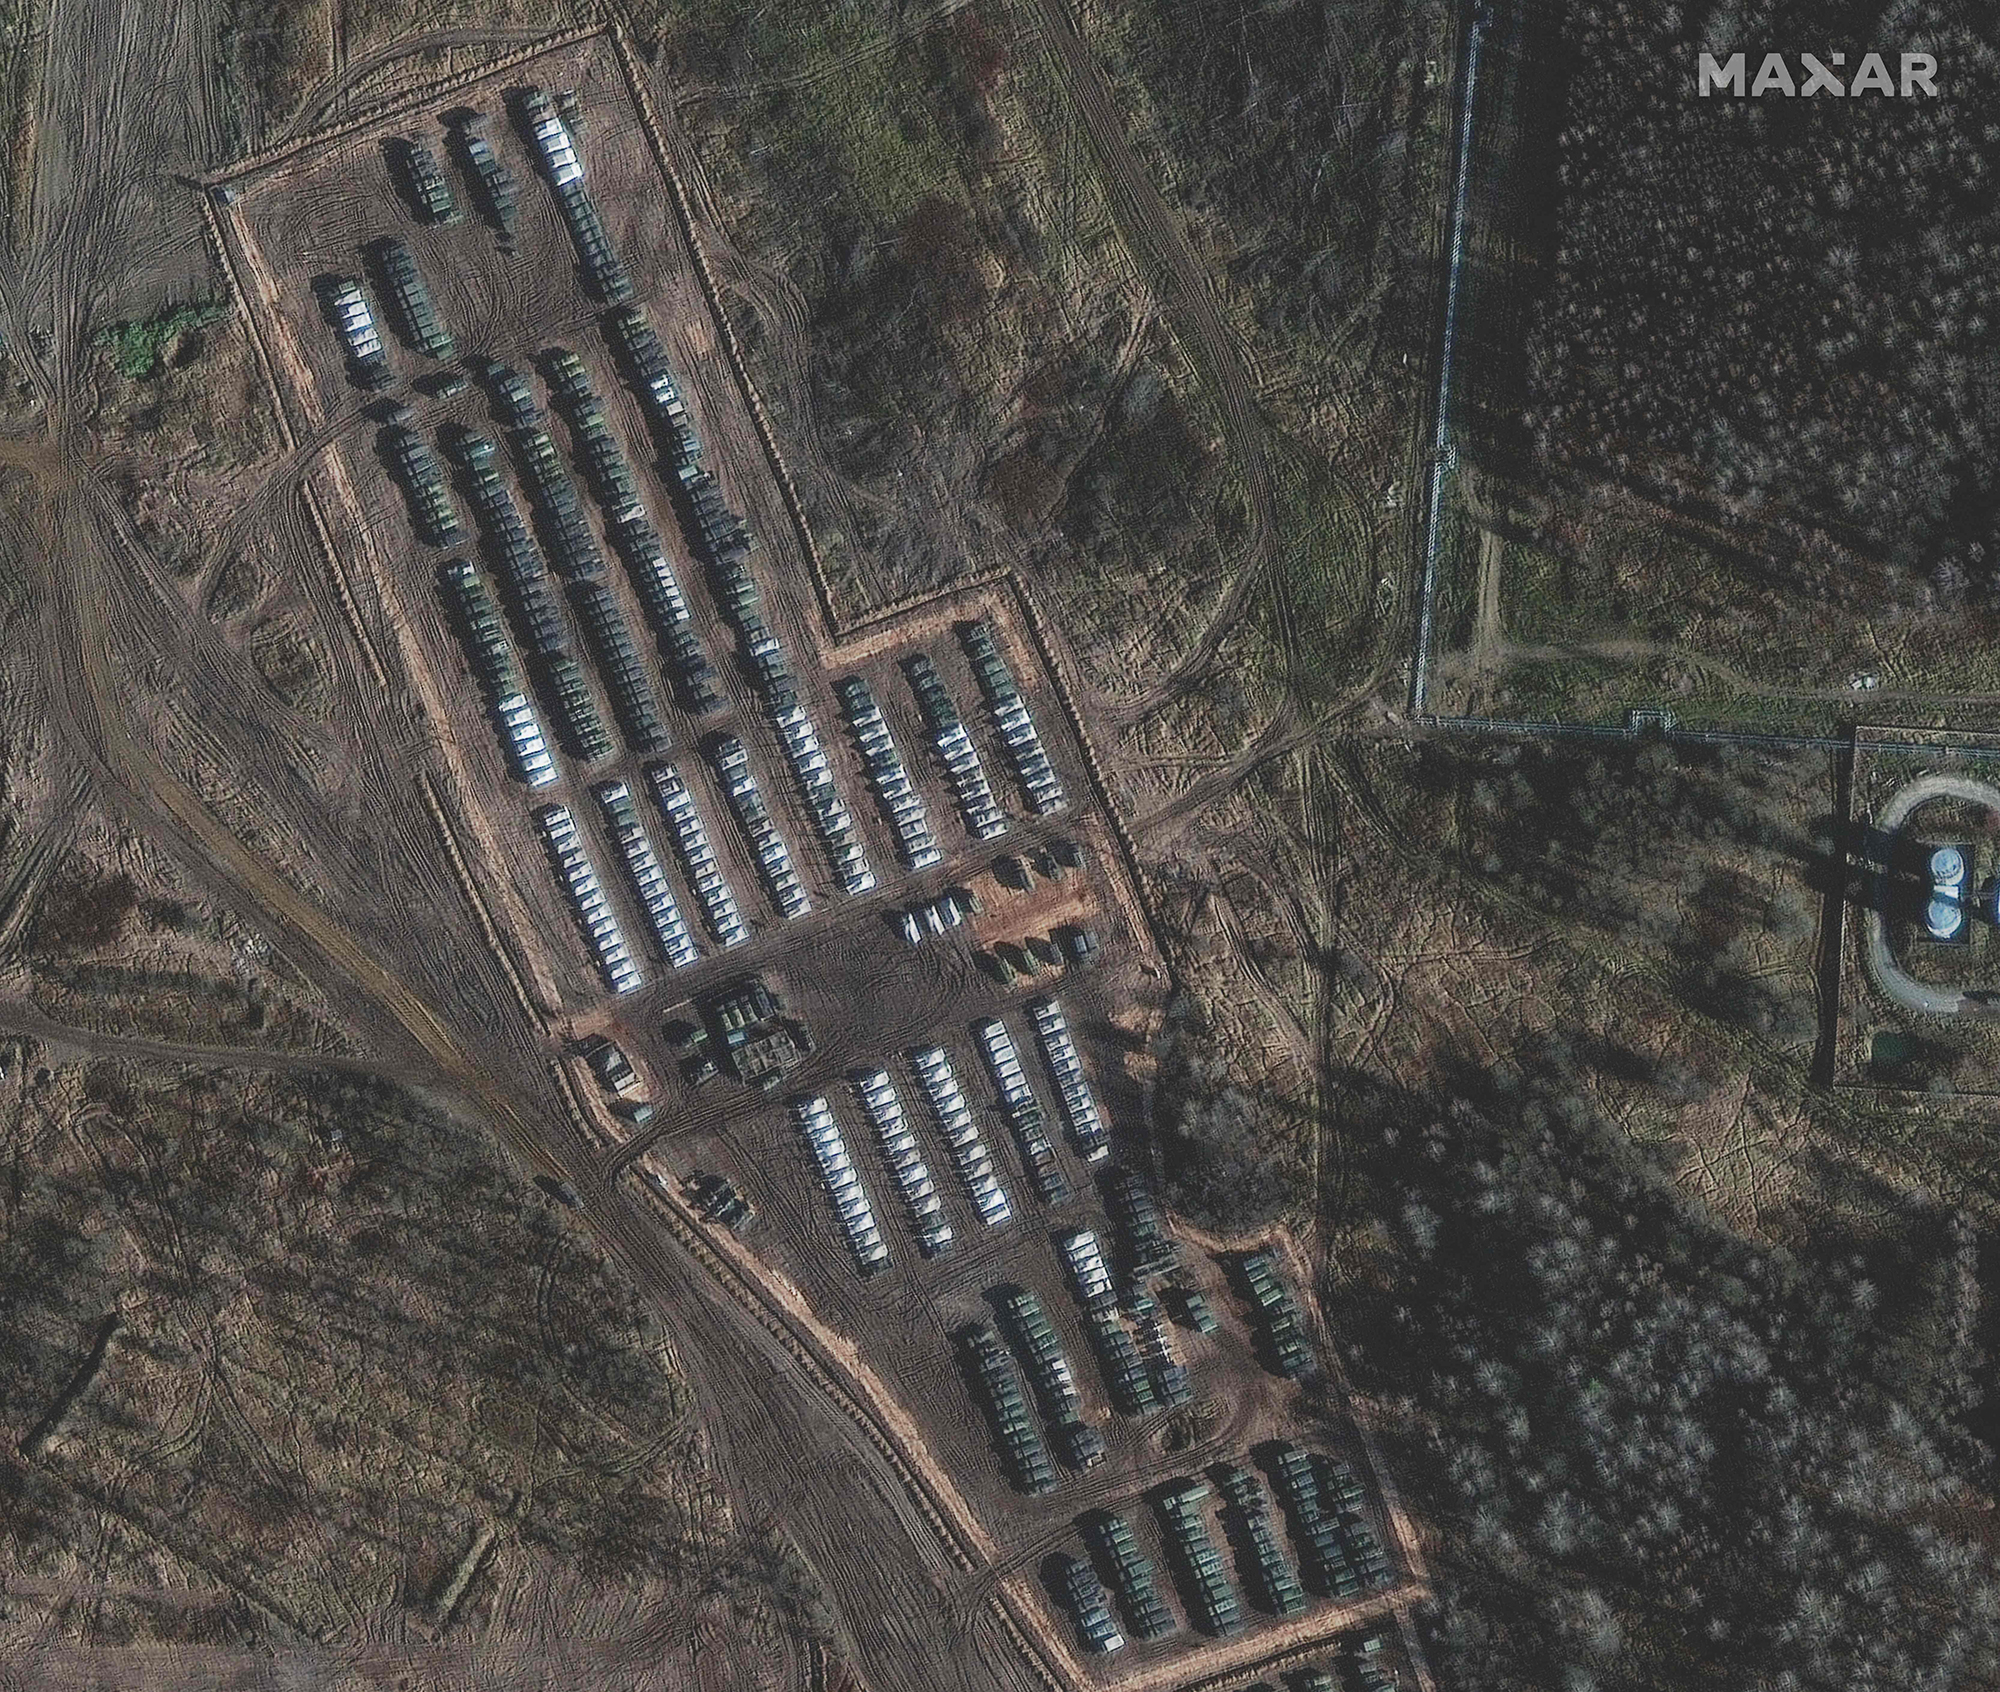 A satellite image shows Russia's heavily armored presence at the Ukraine border.